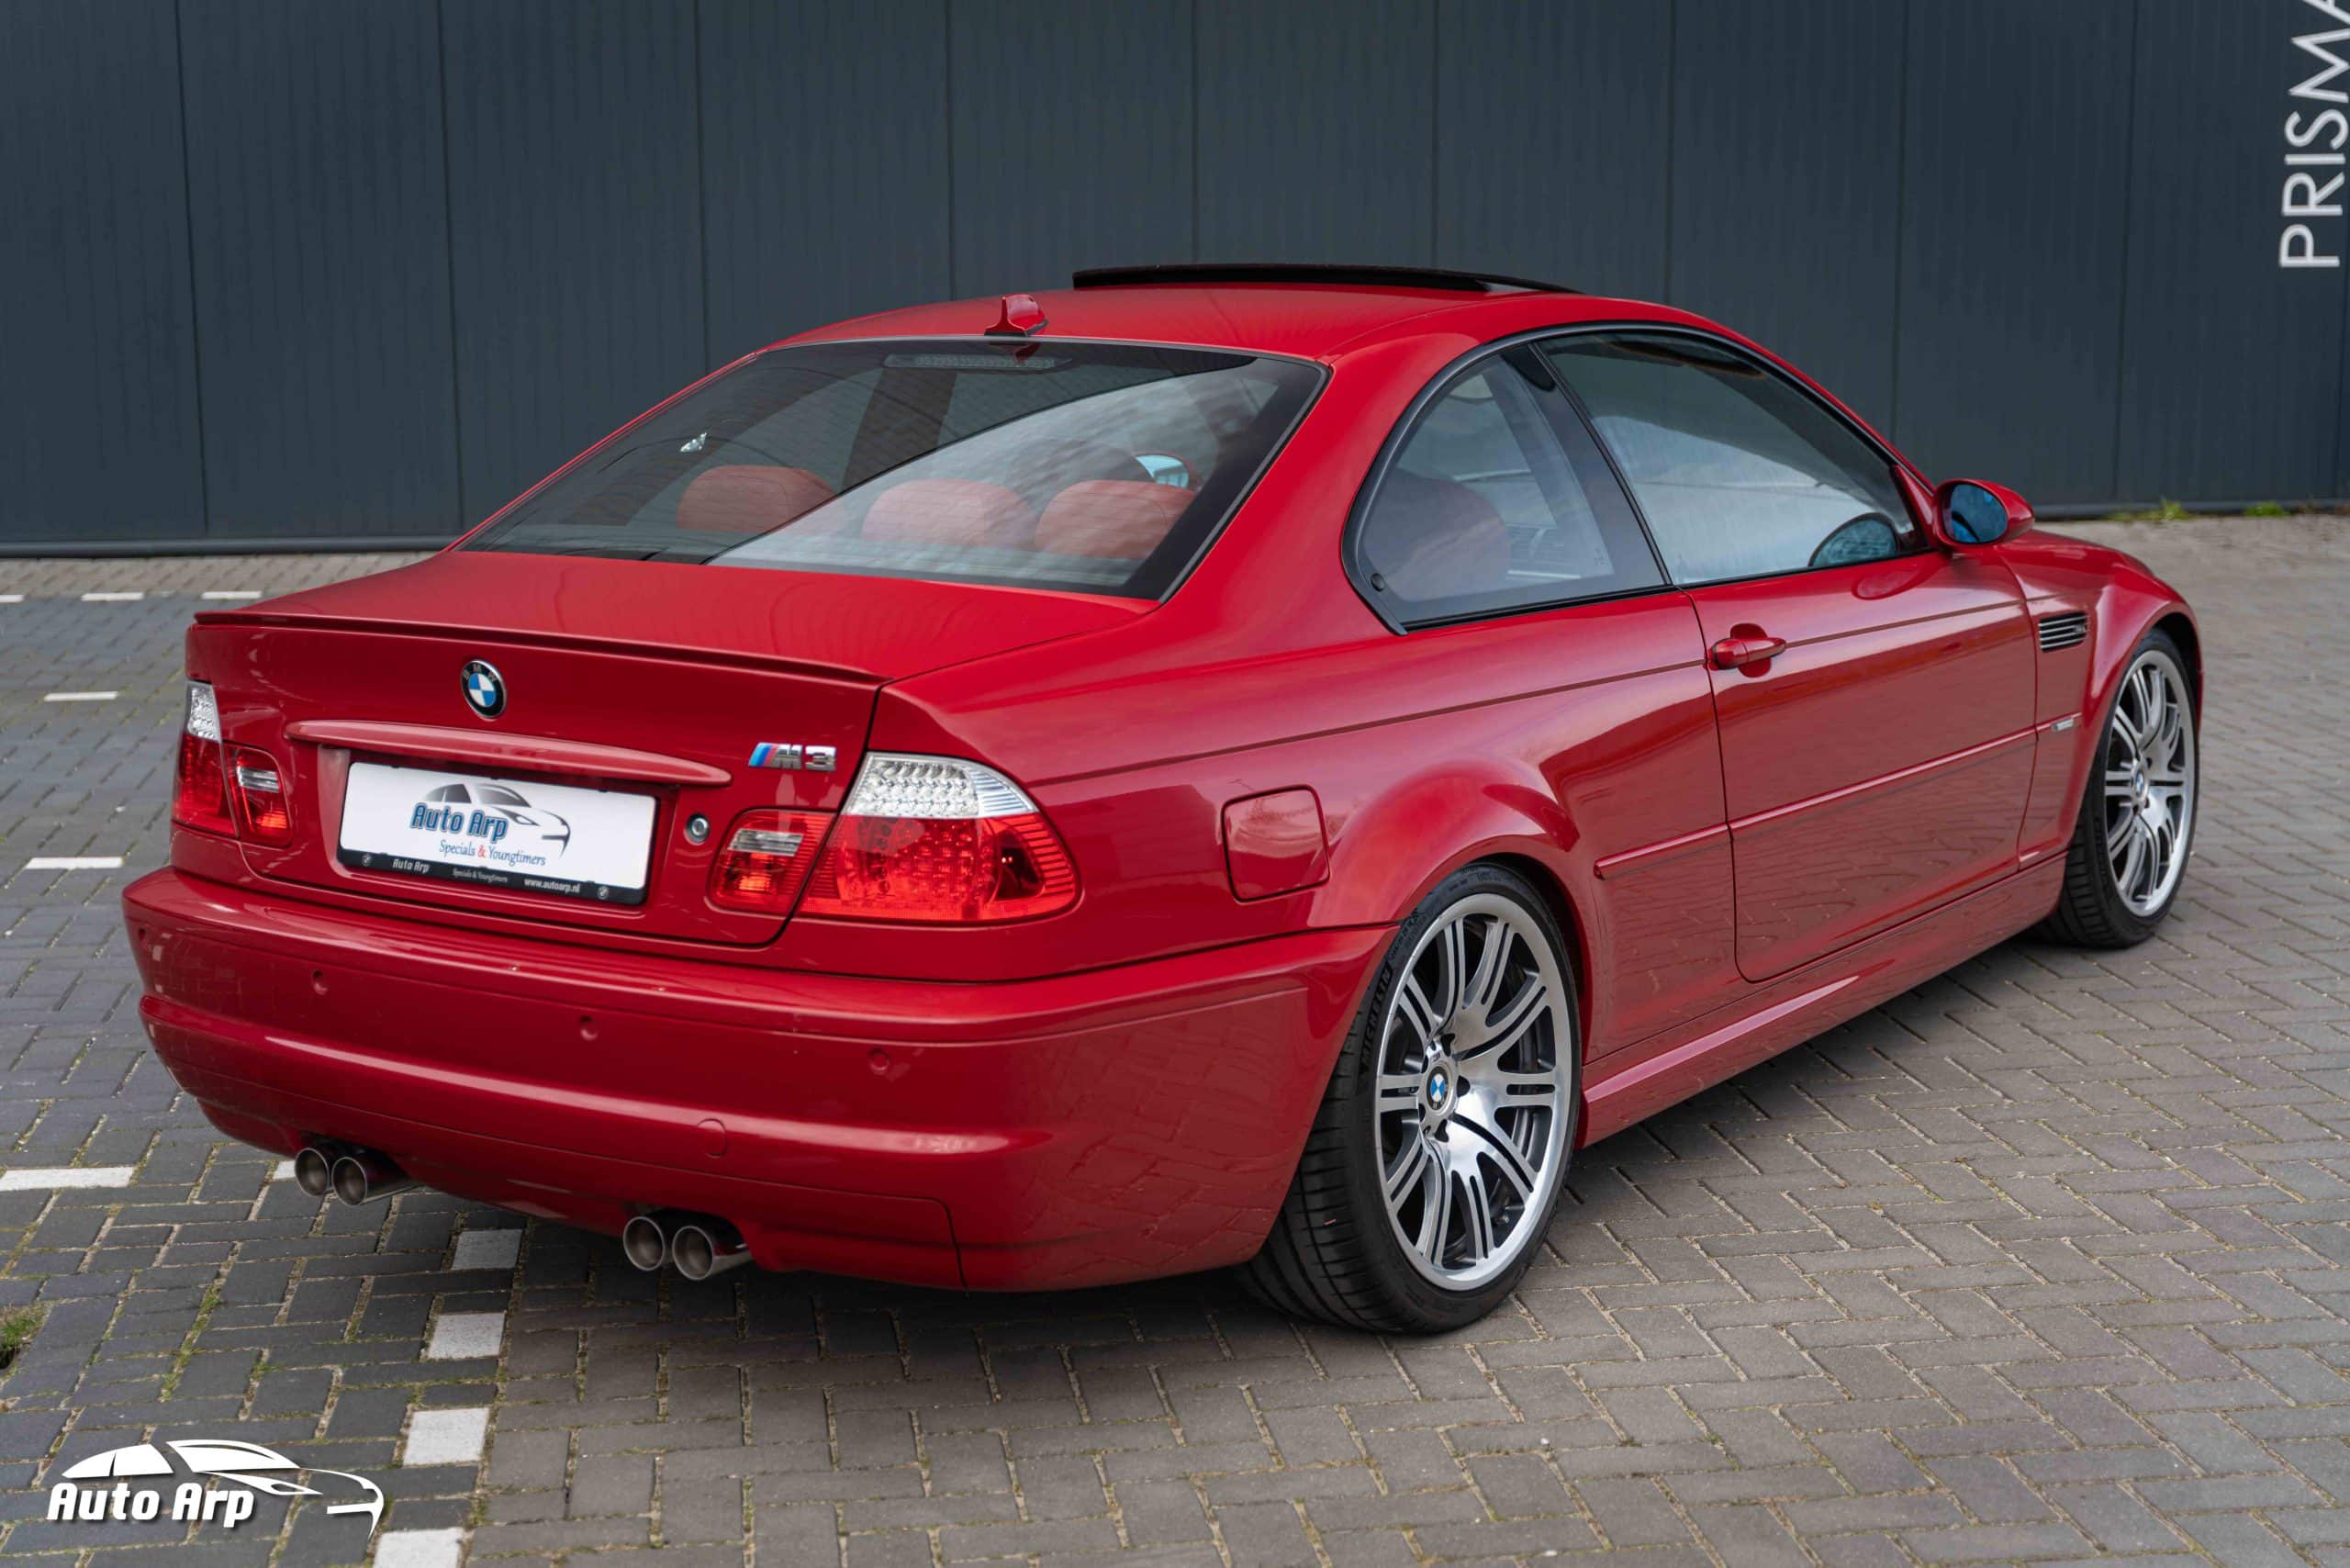 M3 Imola Red only 55,000km | Arp